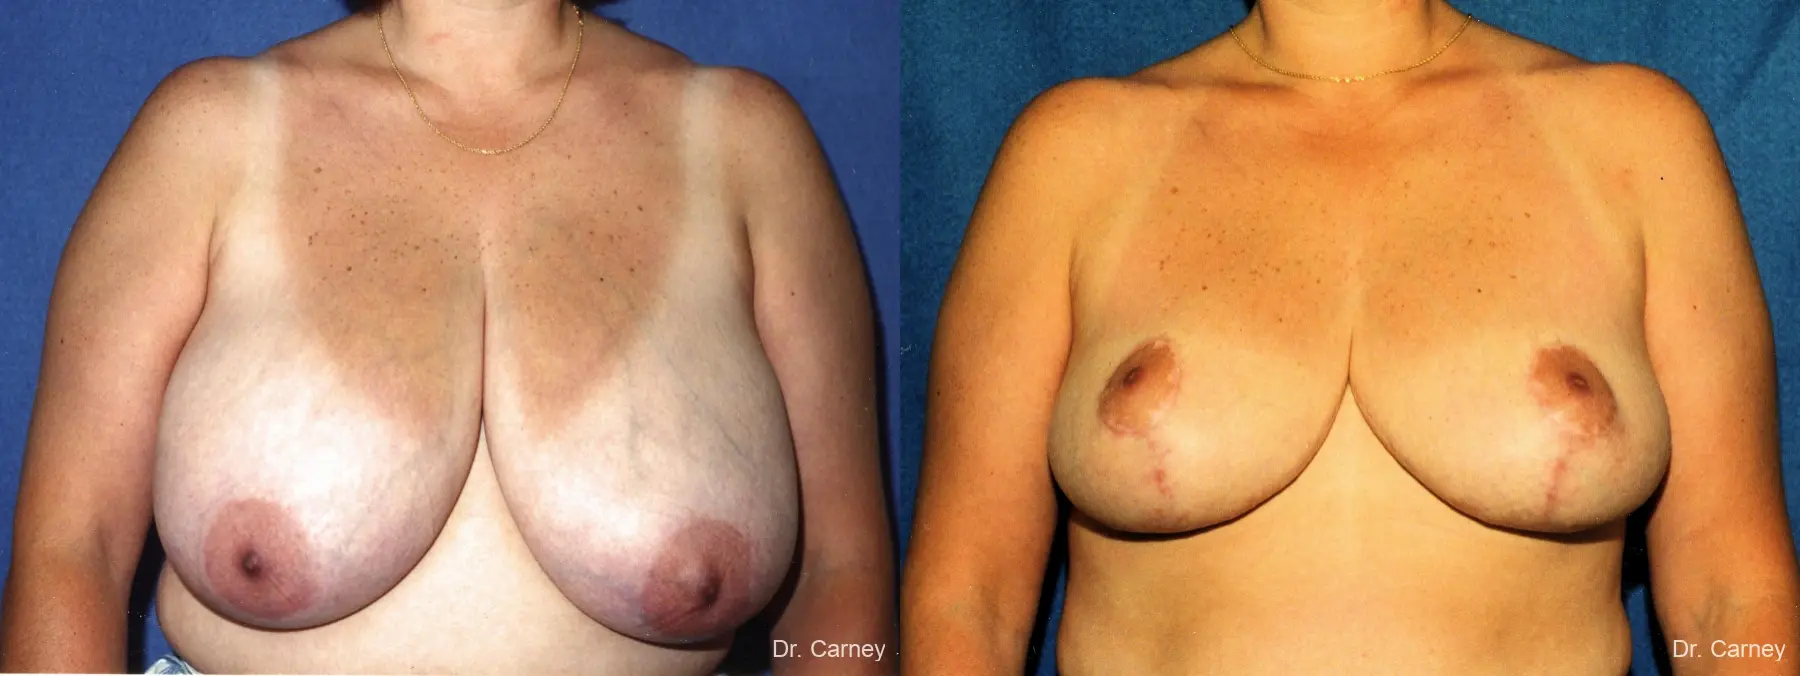 Virginia Beach Breast Reduction 1229 - Before and After 1